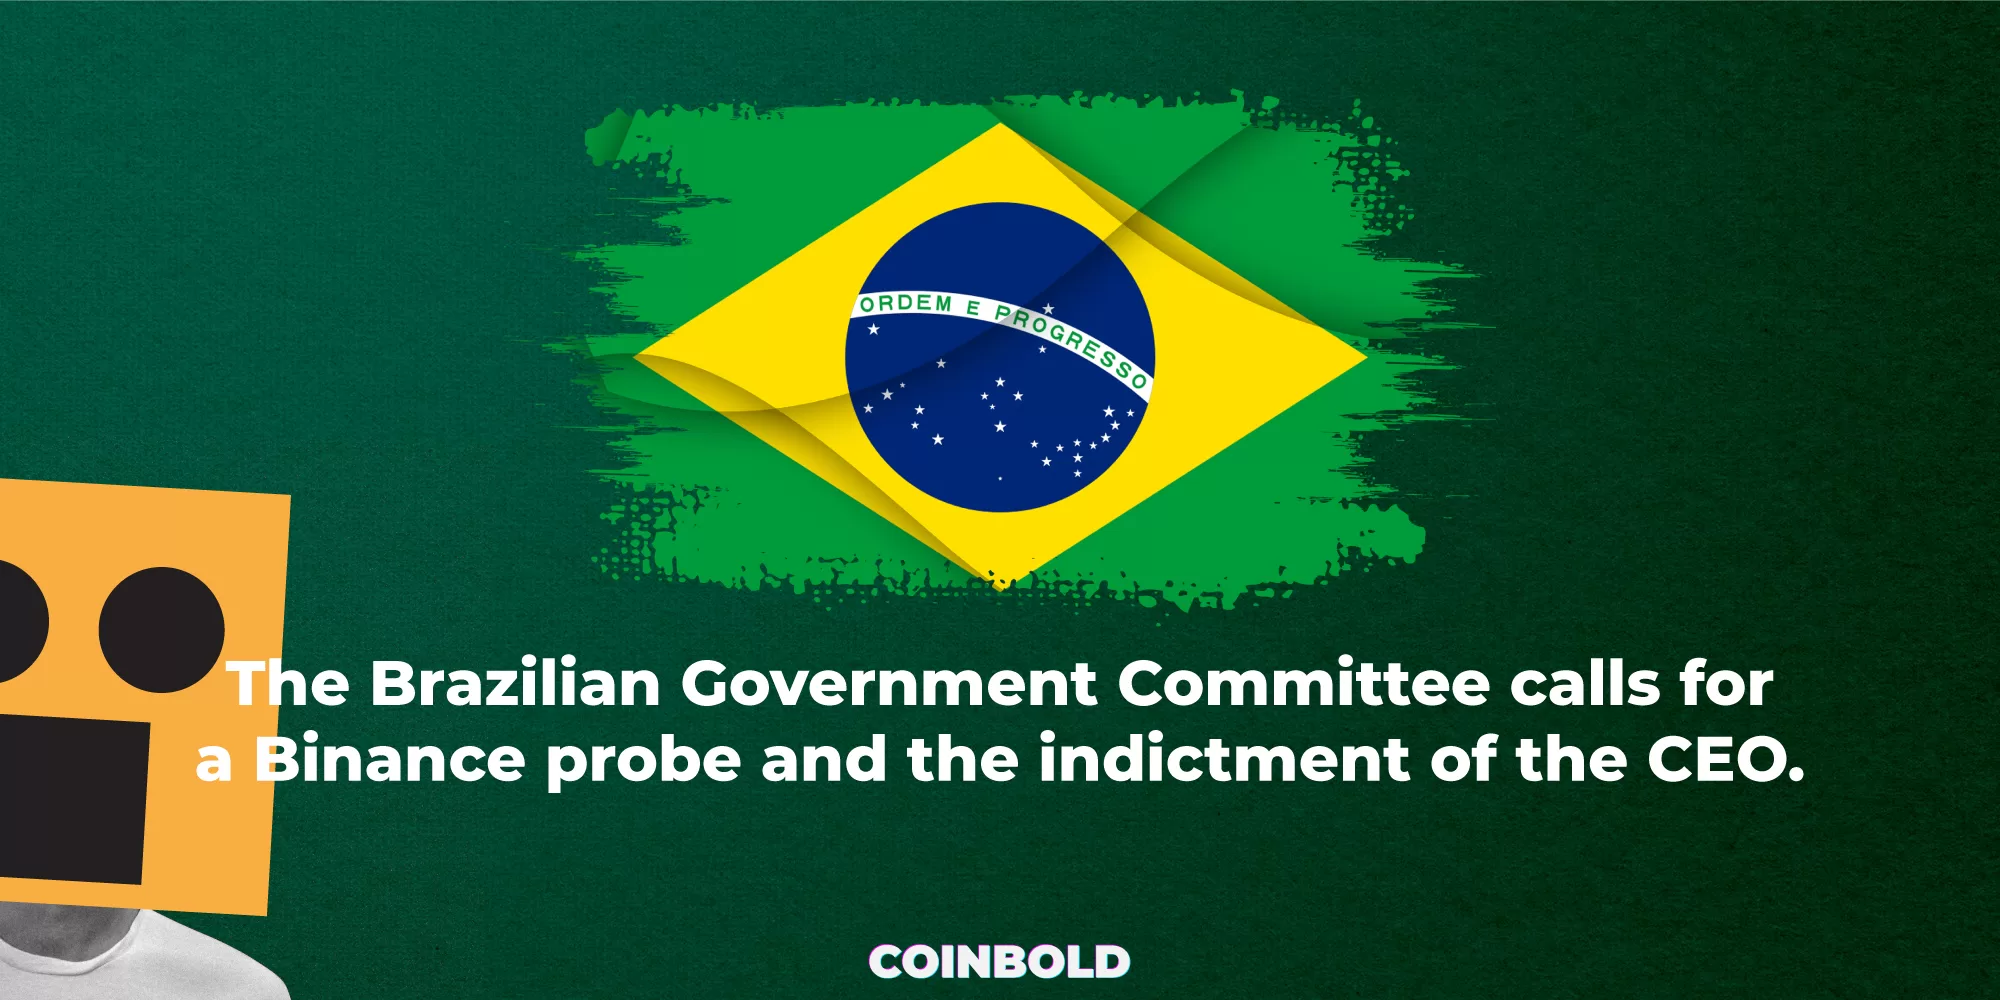 The Brazilian Government Committee calls for a Binance probe and the indictment of the CEO